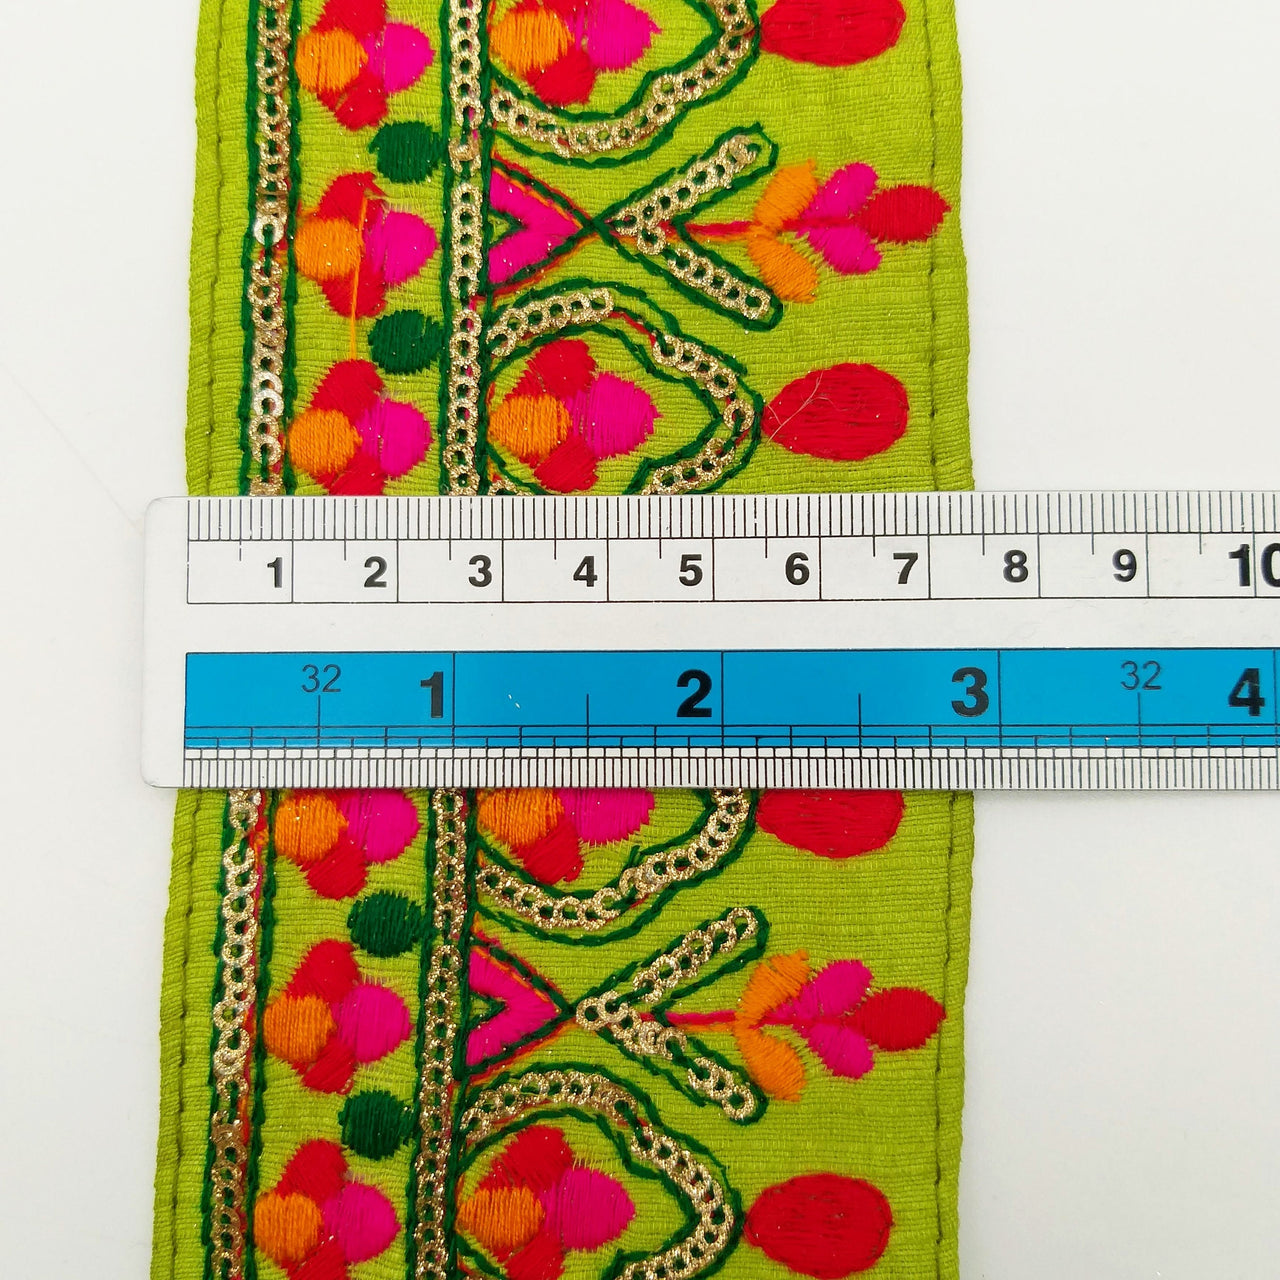 Green Fabric Trim With Green, Fuchsia Pink, Red And Yellow Embroidery and Gold Sequins